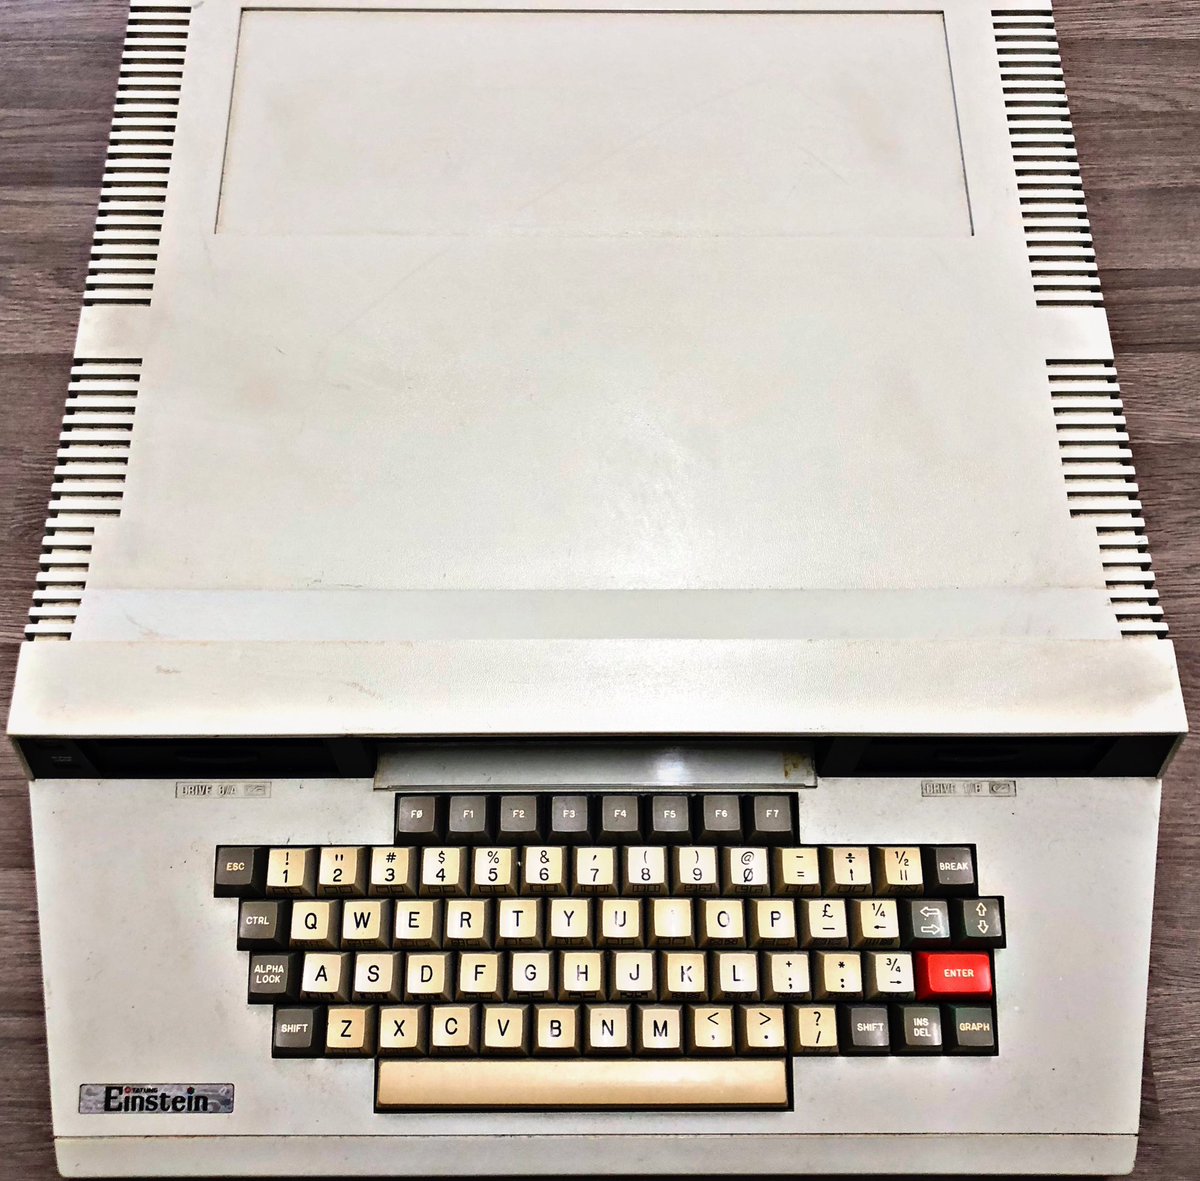 You’ve got a #Tatung #Einstein. Do you save it or swap it? If saving, then why? If swapping, then for what? #RetroSaveOrSwap #RetroComputing #ComputerHistory #RetroGaming #VideoGames